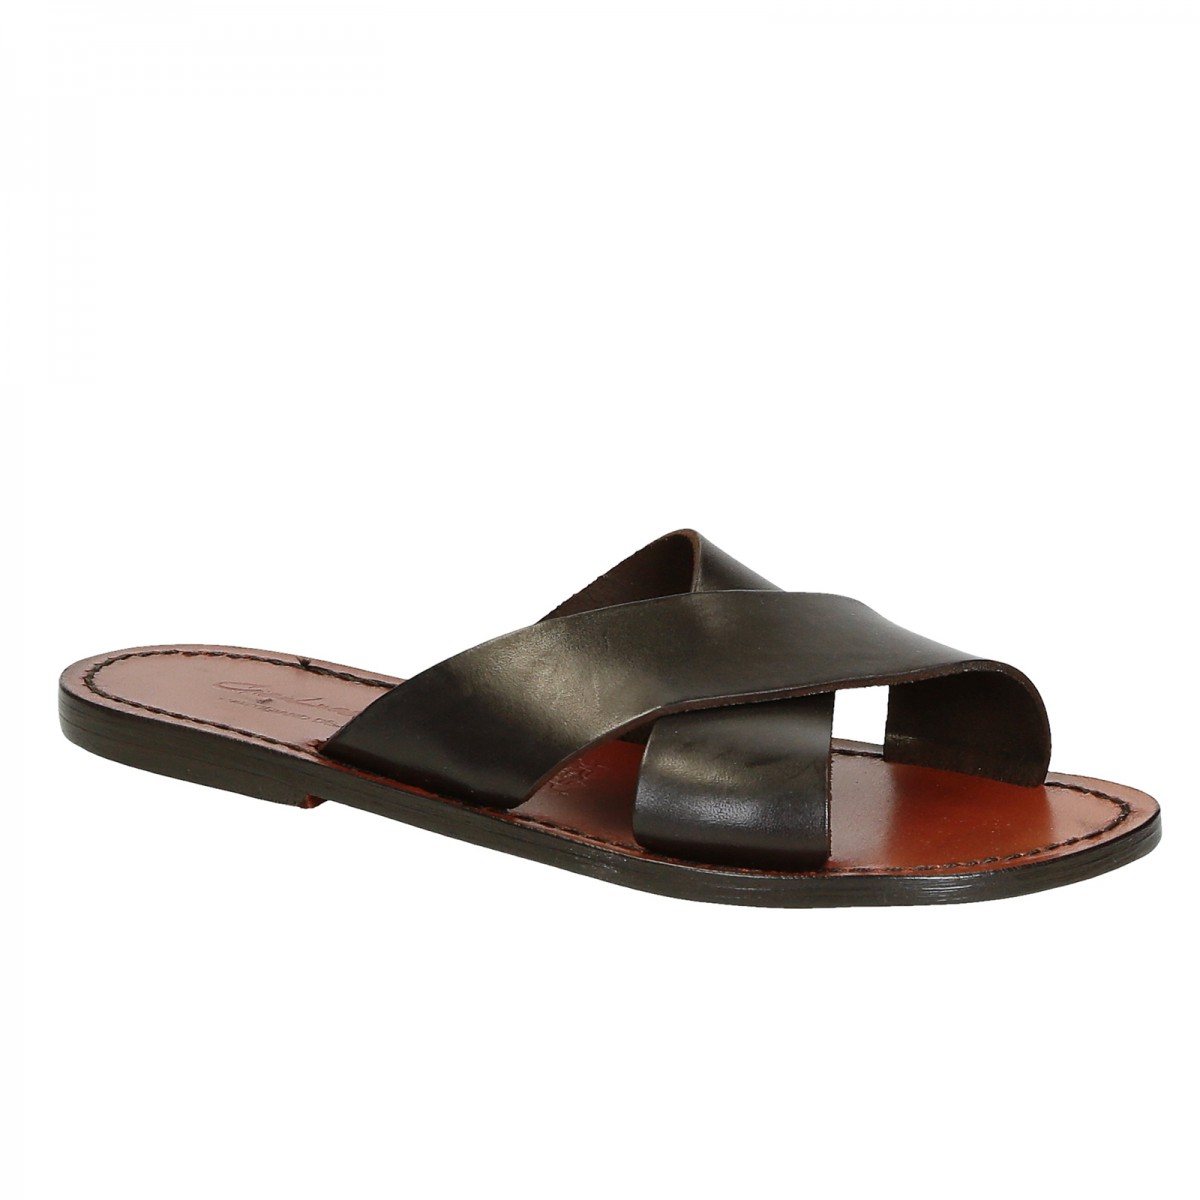 Brown leather slide sandals for women handmade | The leather craftsmen